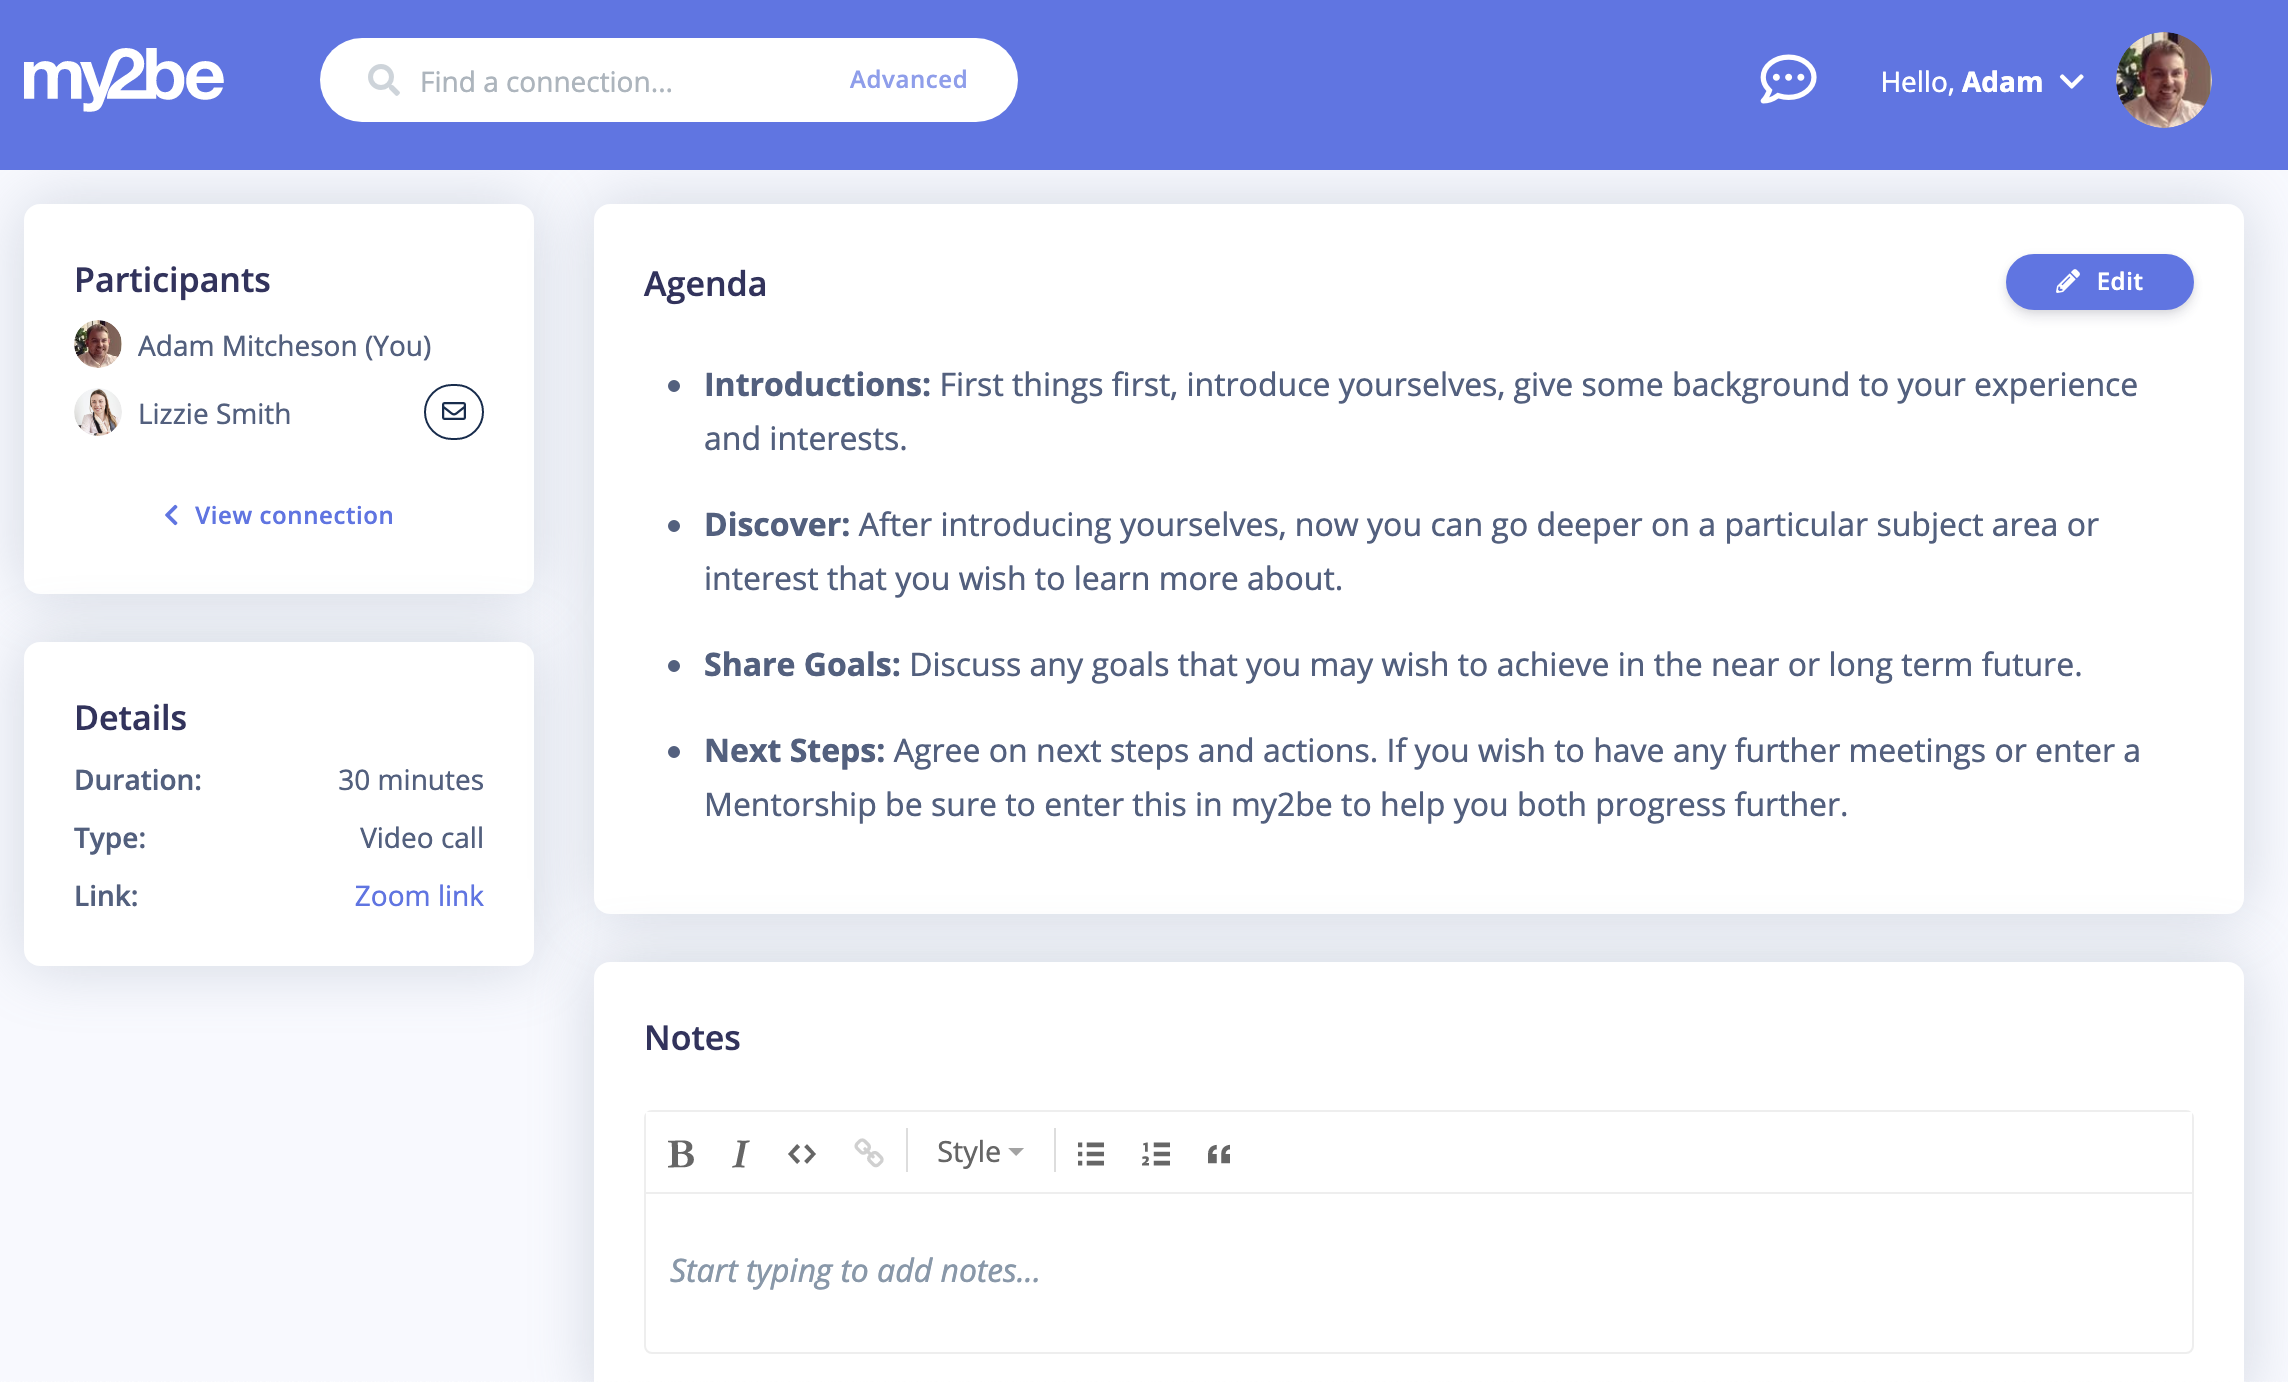 Simply manage meetings with Zoom links, agenda, notes and actions all in one handy place